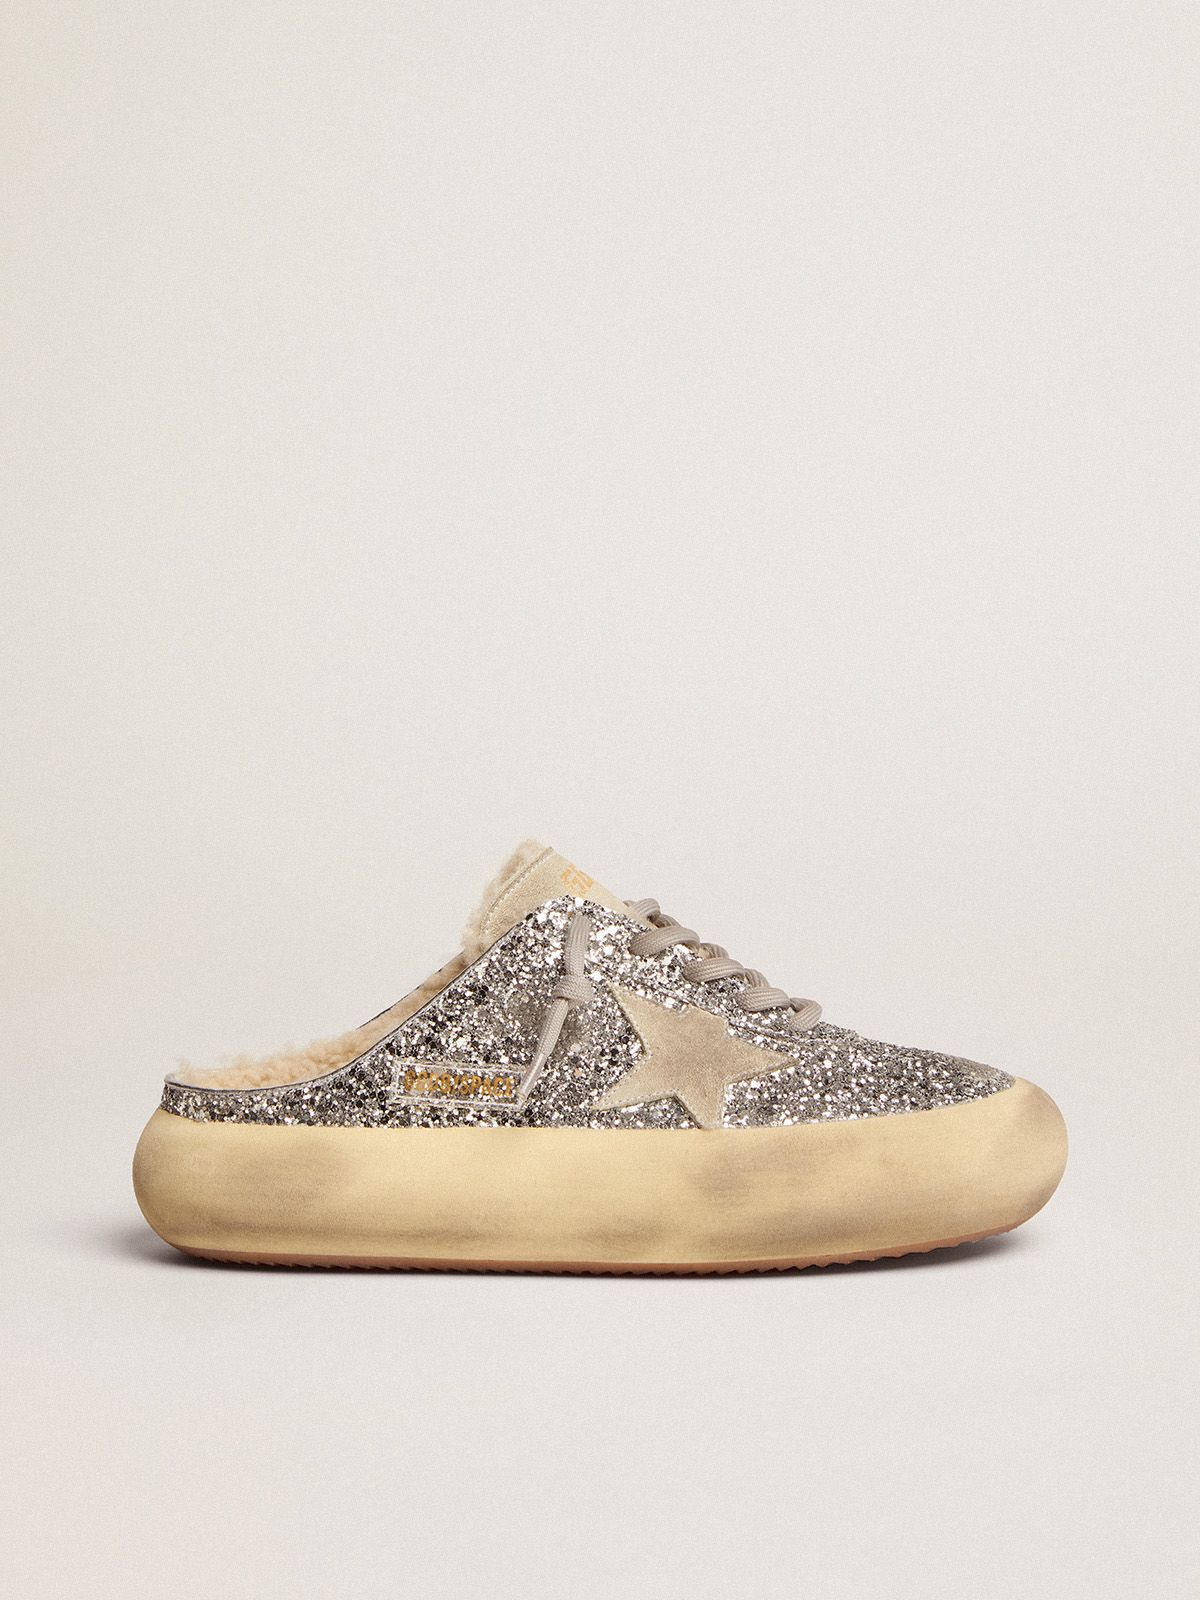 golden goose Space-Star shearling silver Sabot lining in glitter shoes with